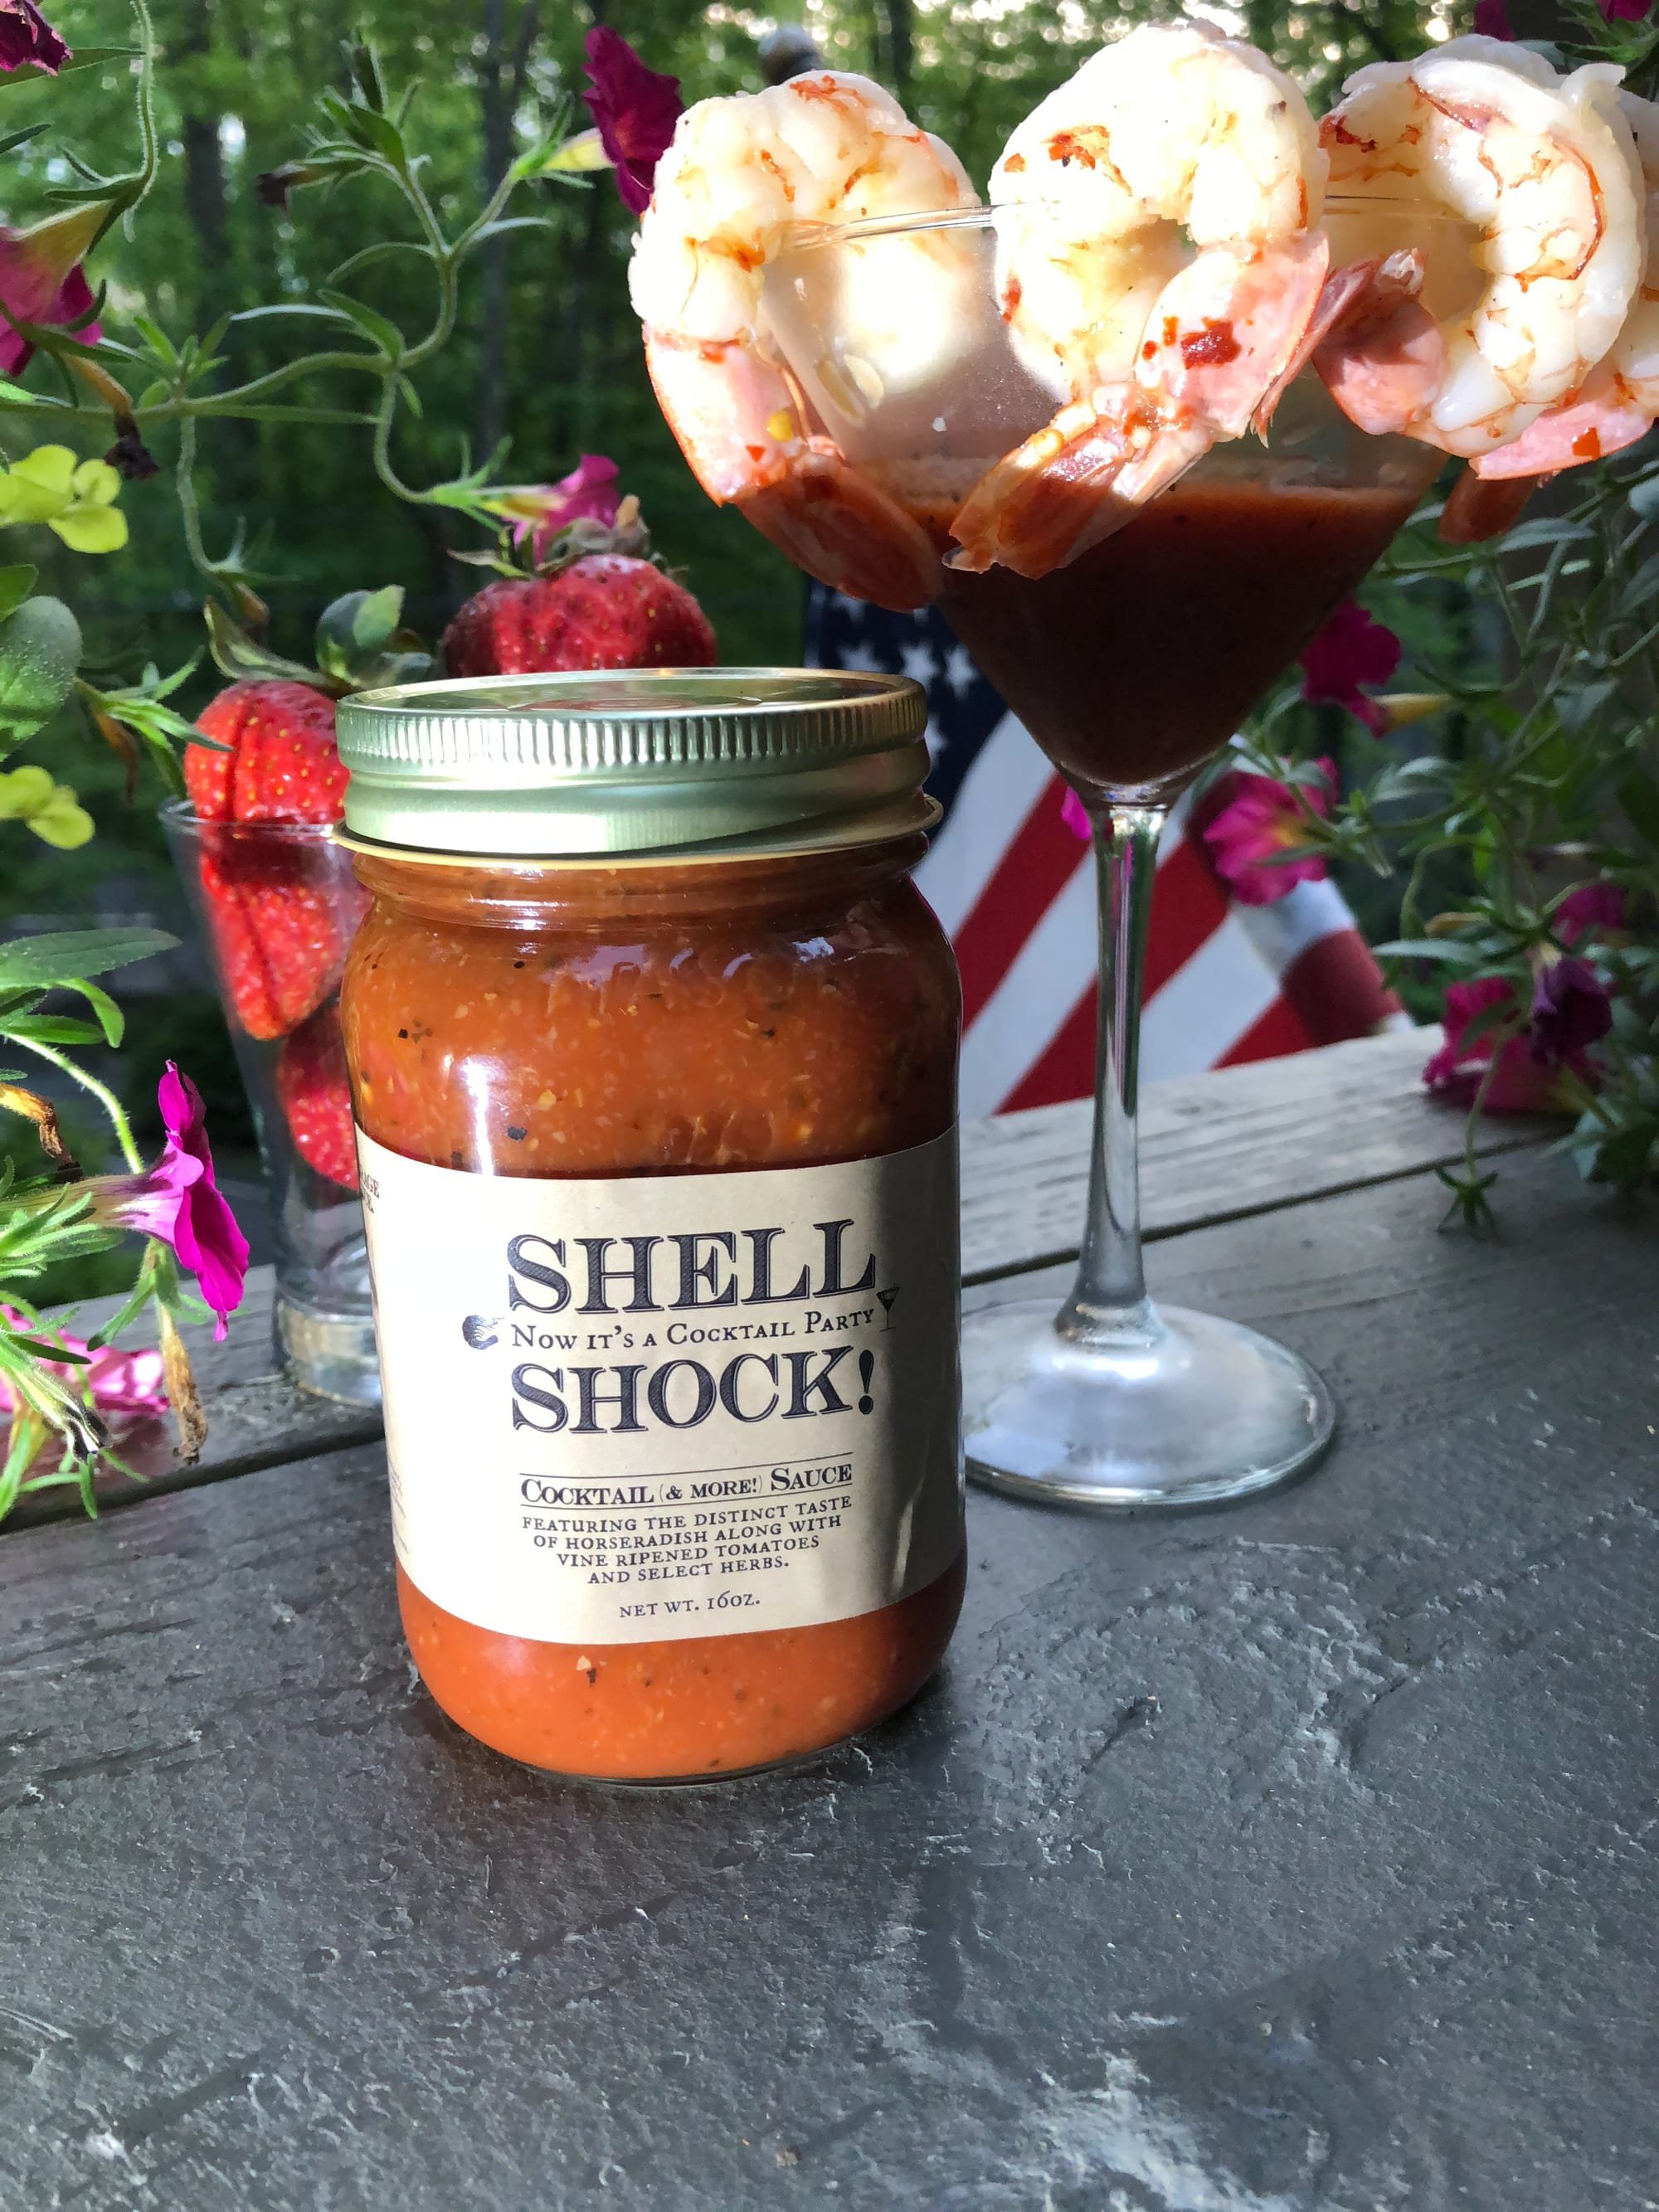 Shell Shock Cocktail Sauce